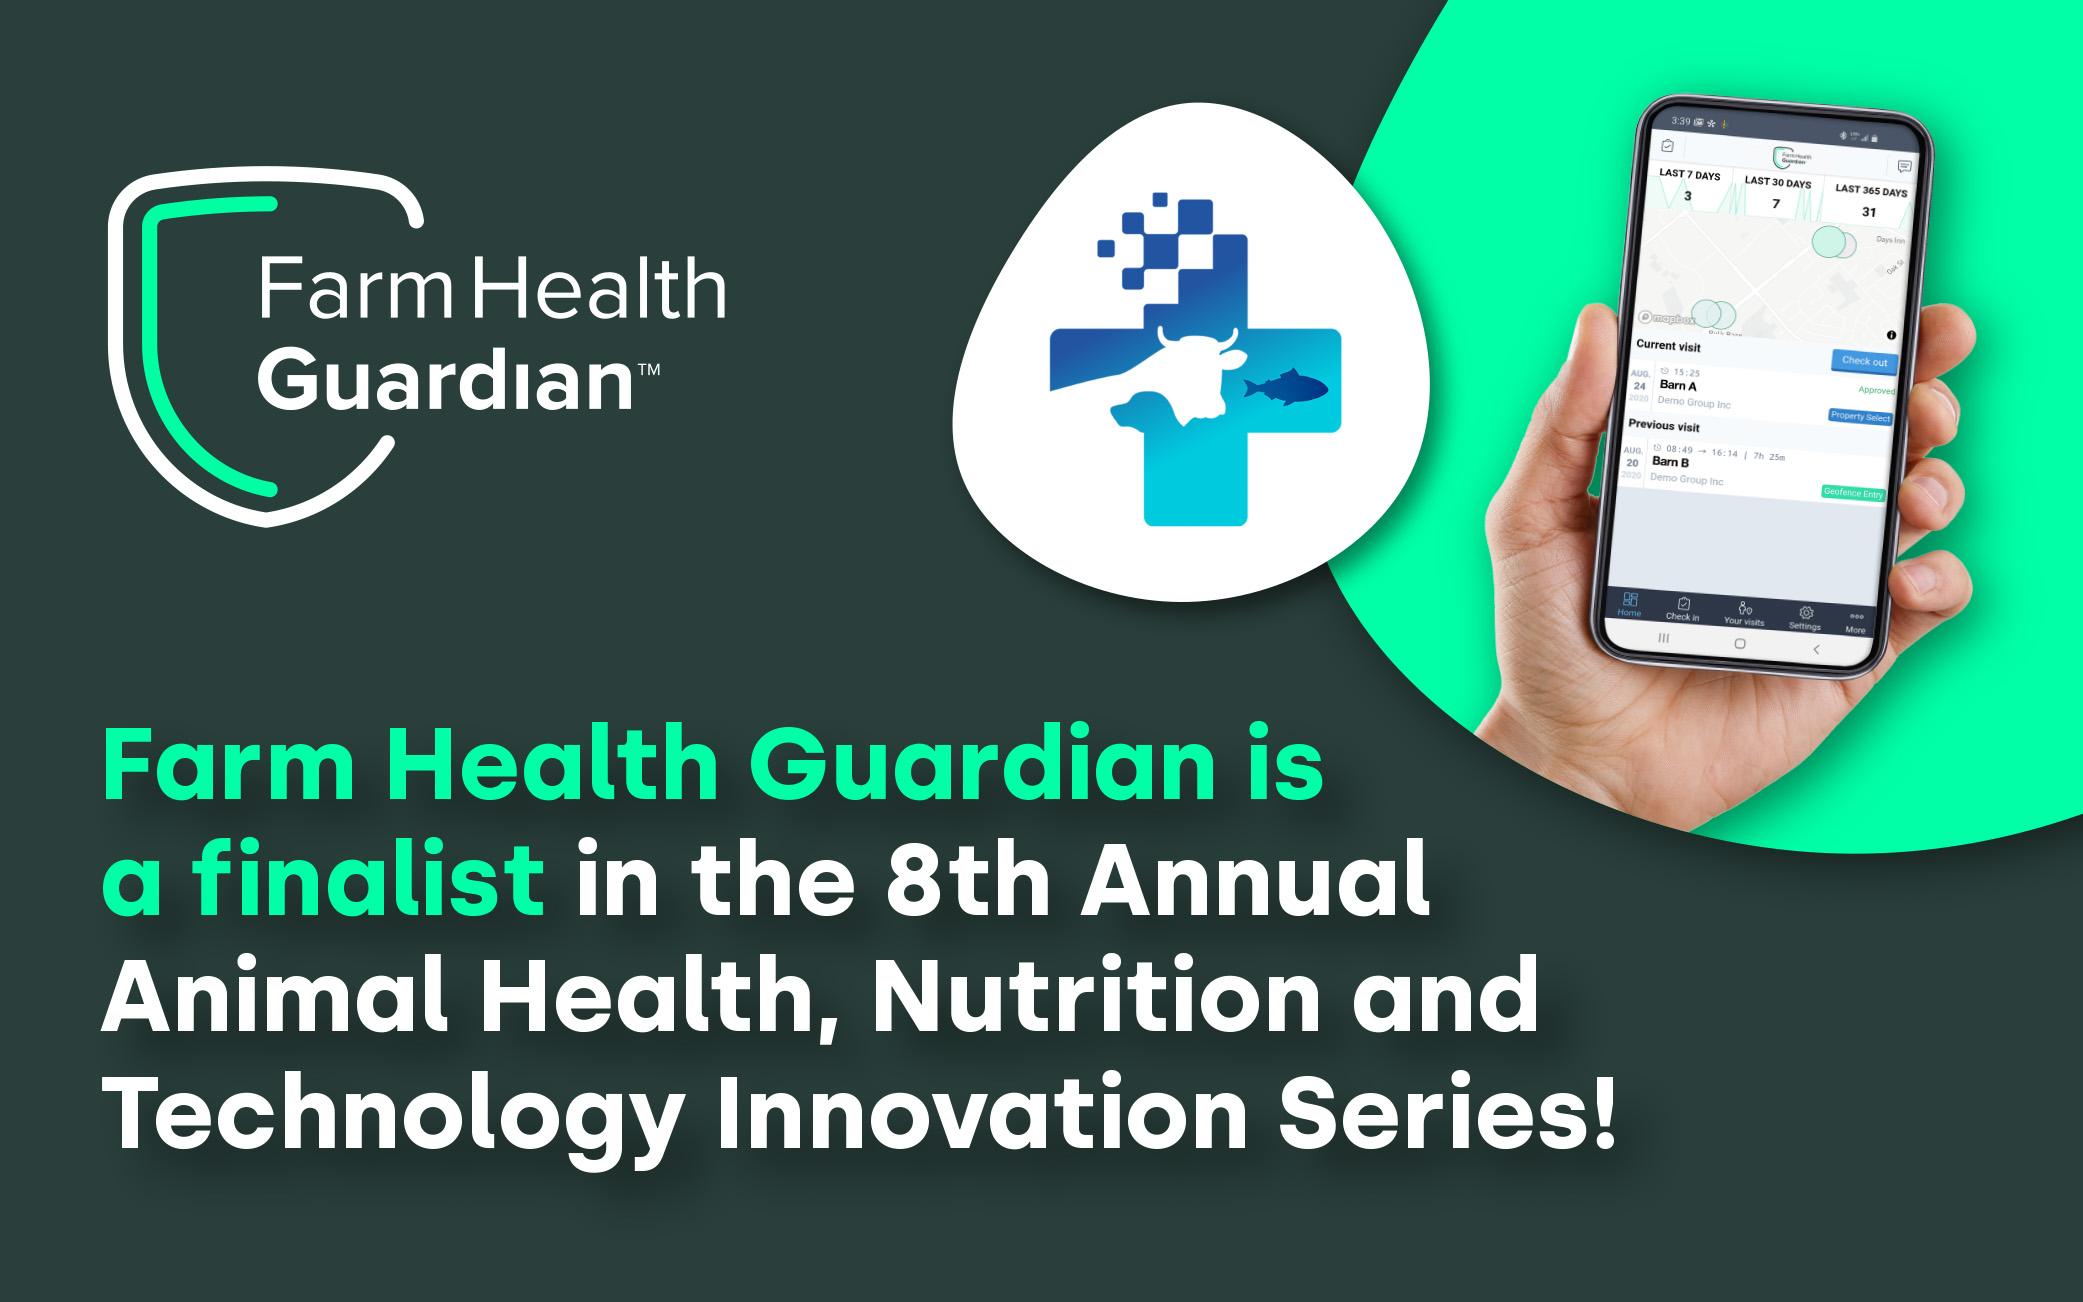 Farm Health Guardian is a finalist in the 8th Annual Animal Health, Nutrition and Technology Innovation series!